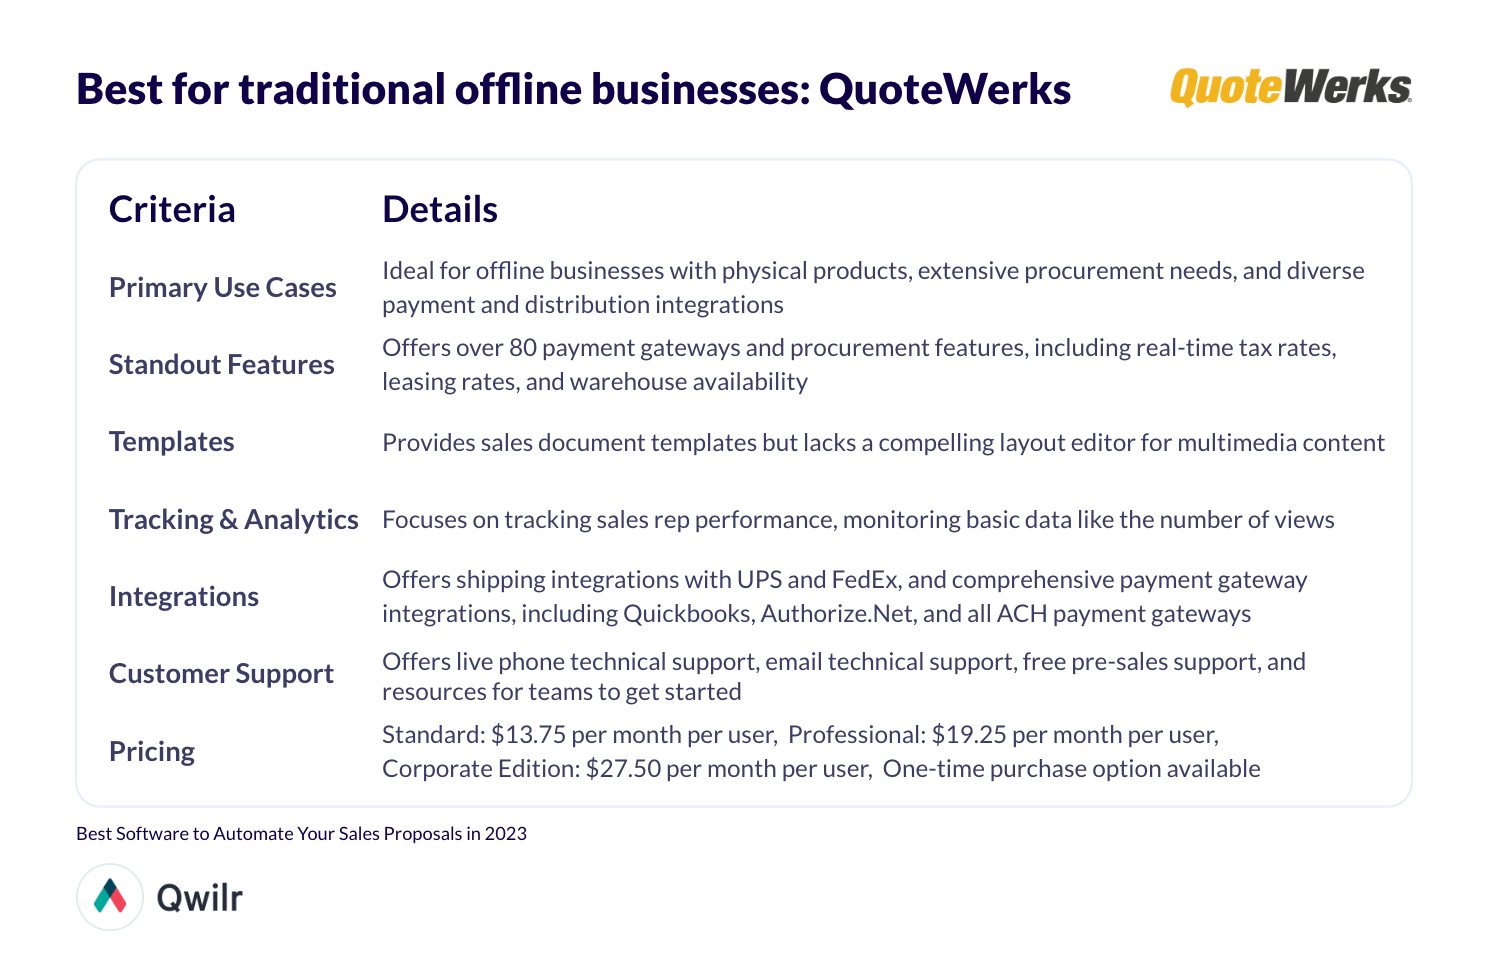 Table summary of Best for traditional offline businesses: QuoteWerks